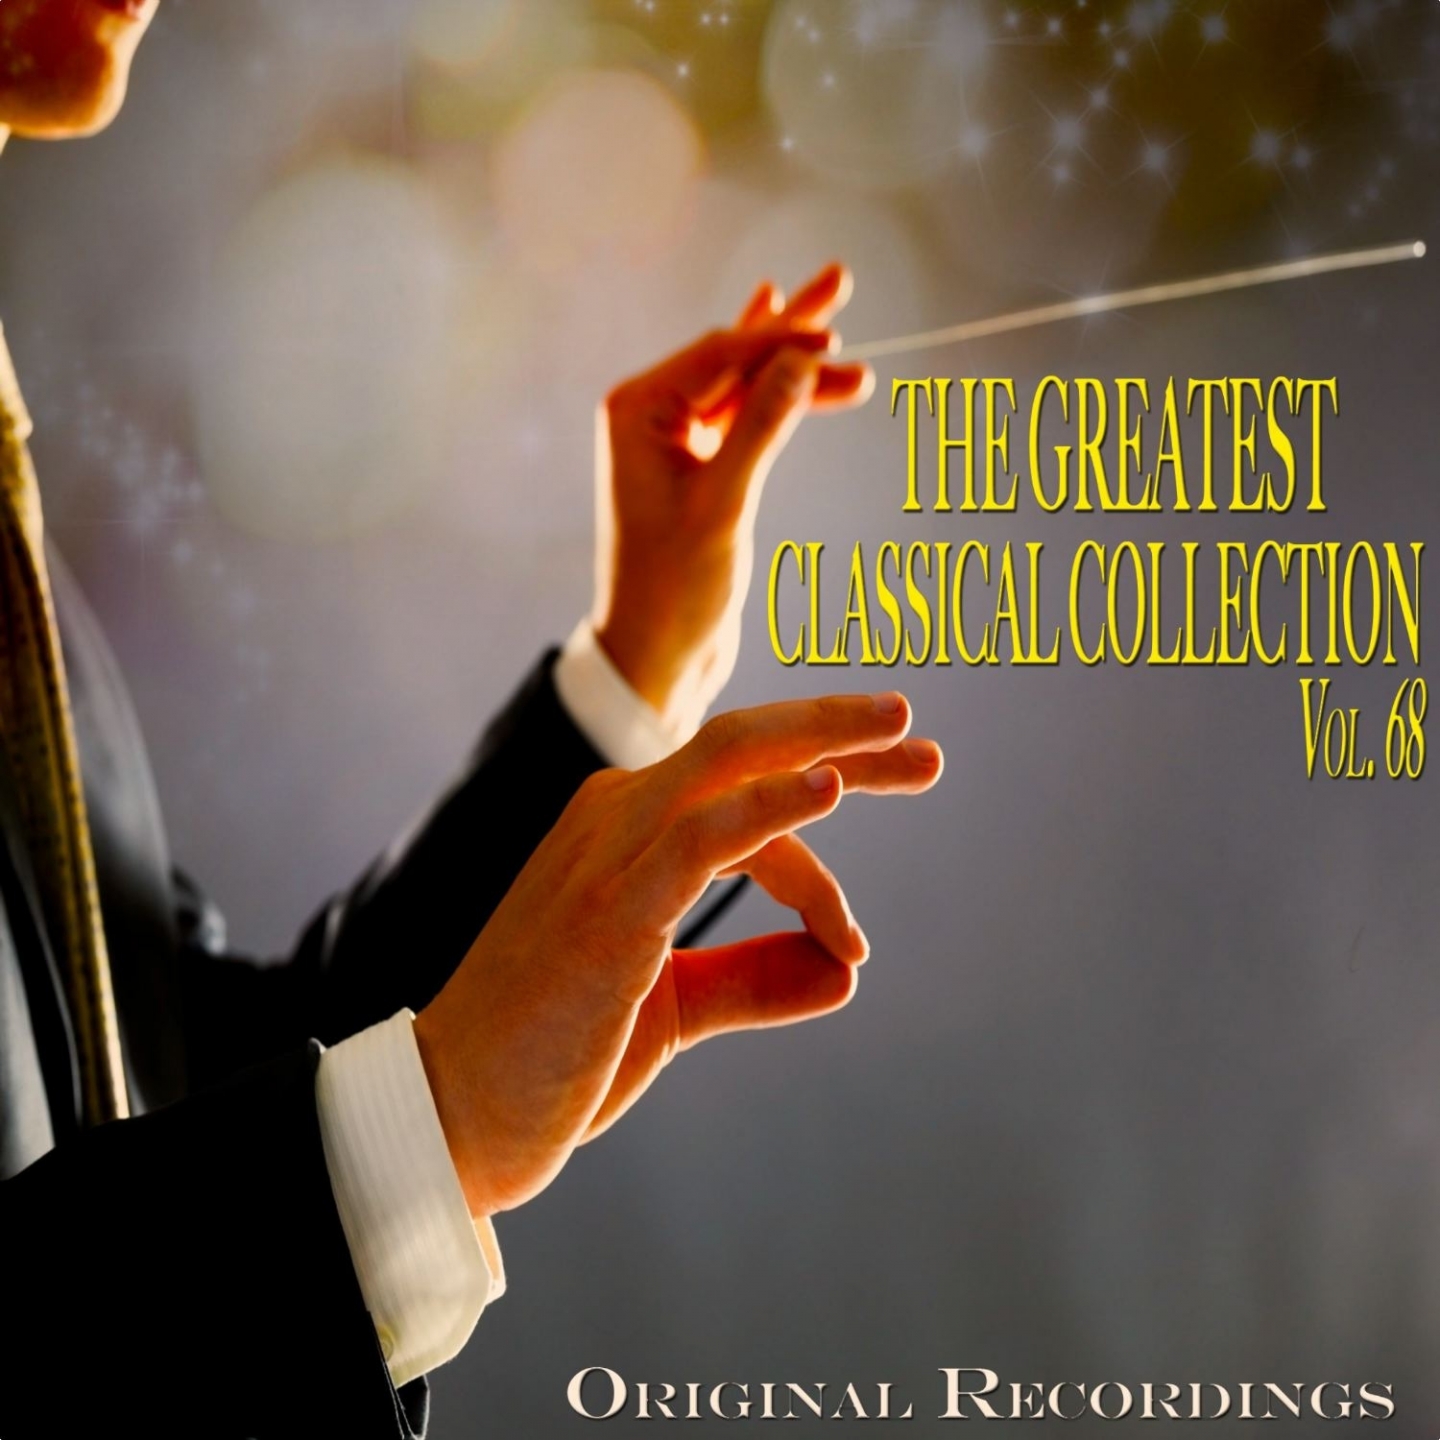 The Greatest Classical Collection Vol. 68